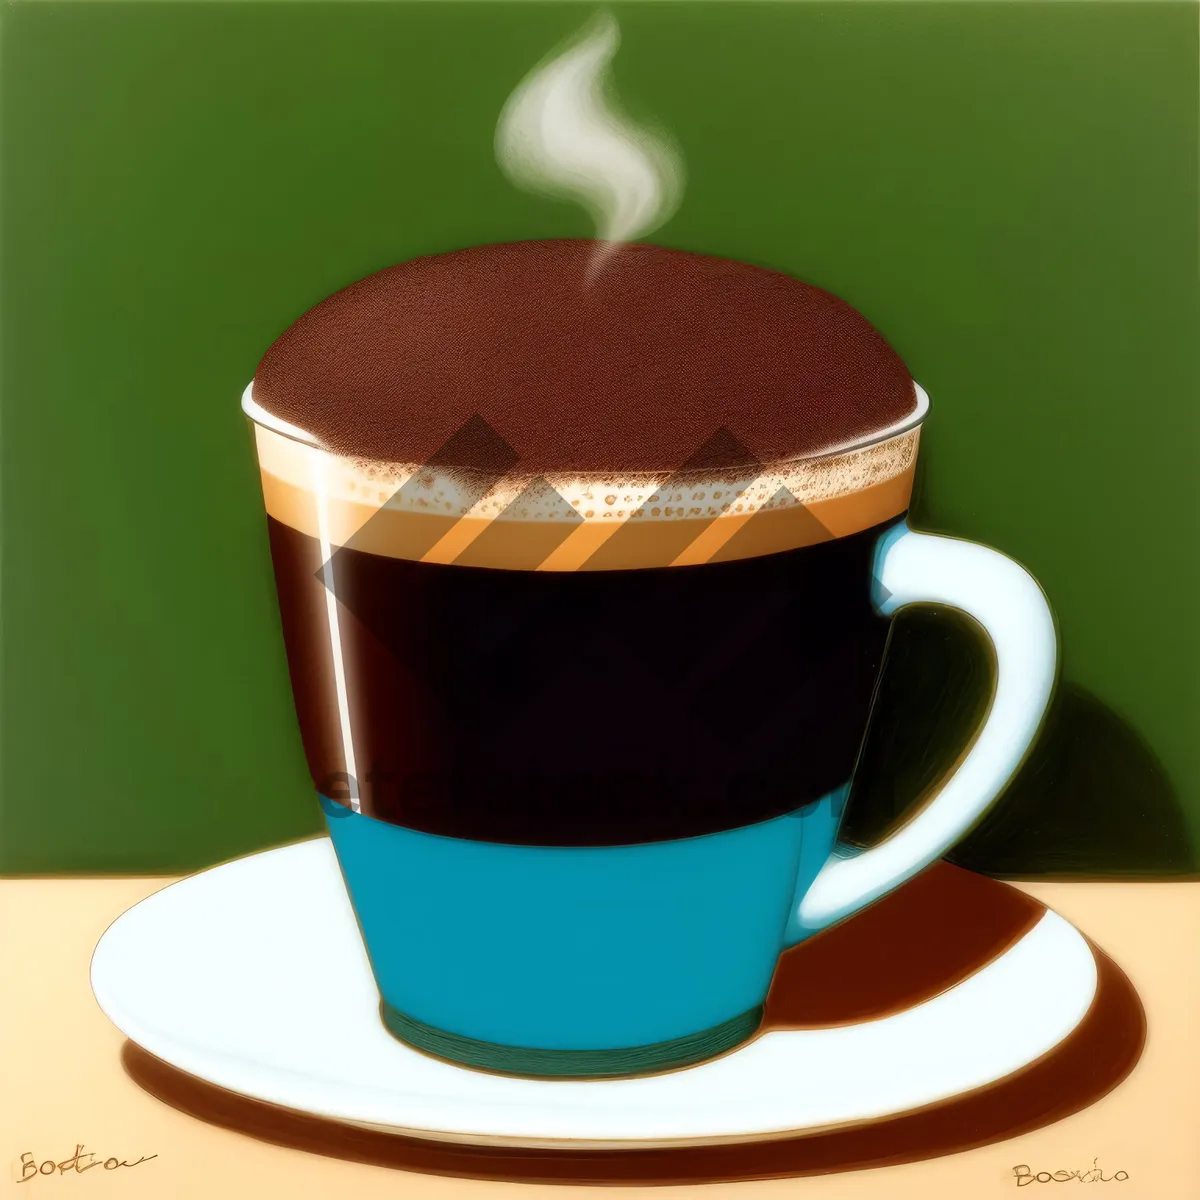 Picture of Morning Brew: Cup of Espresso and Saucer